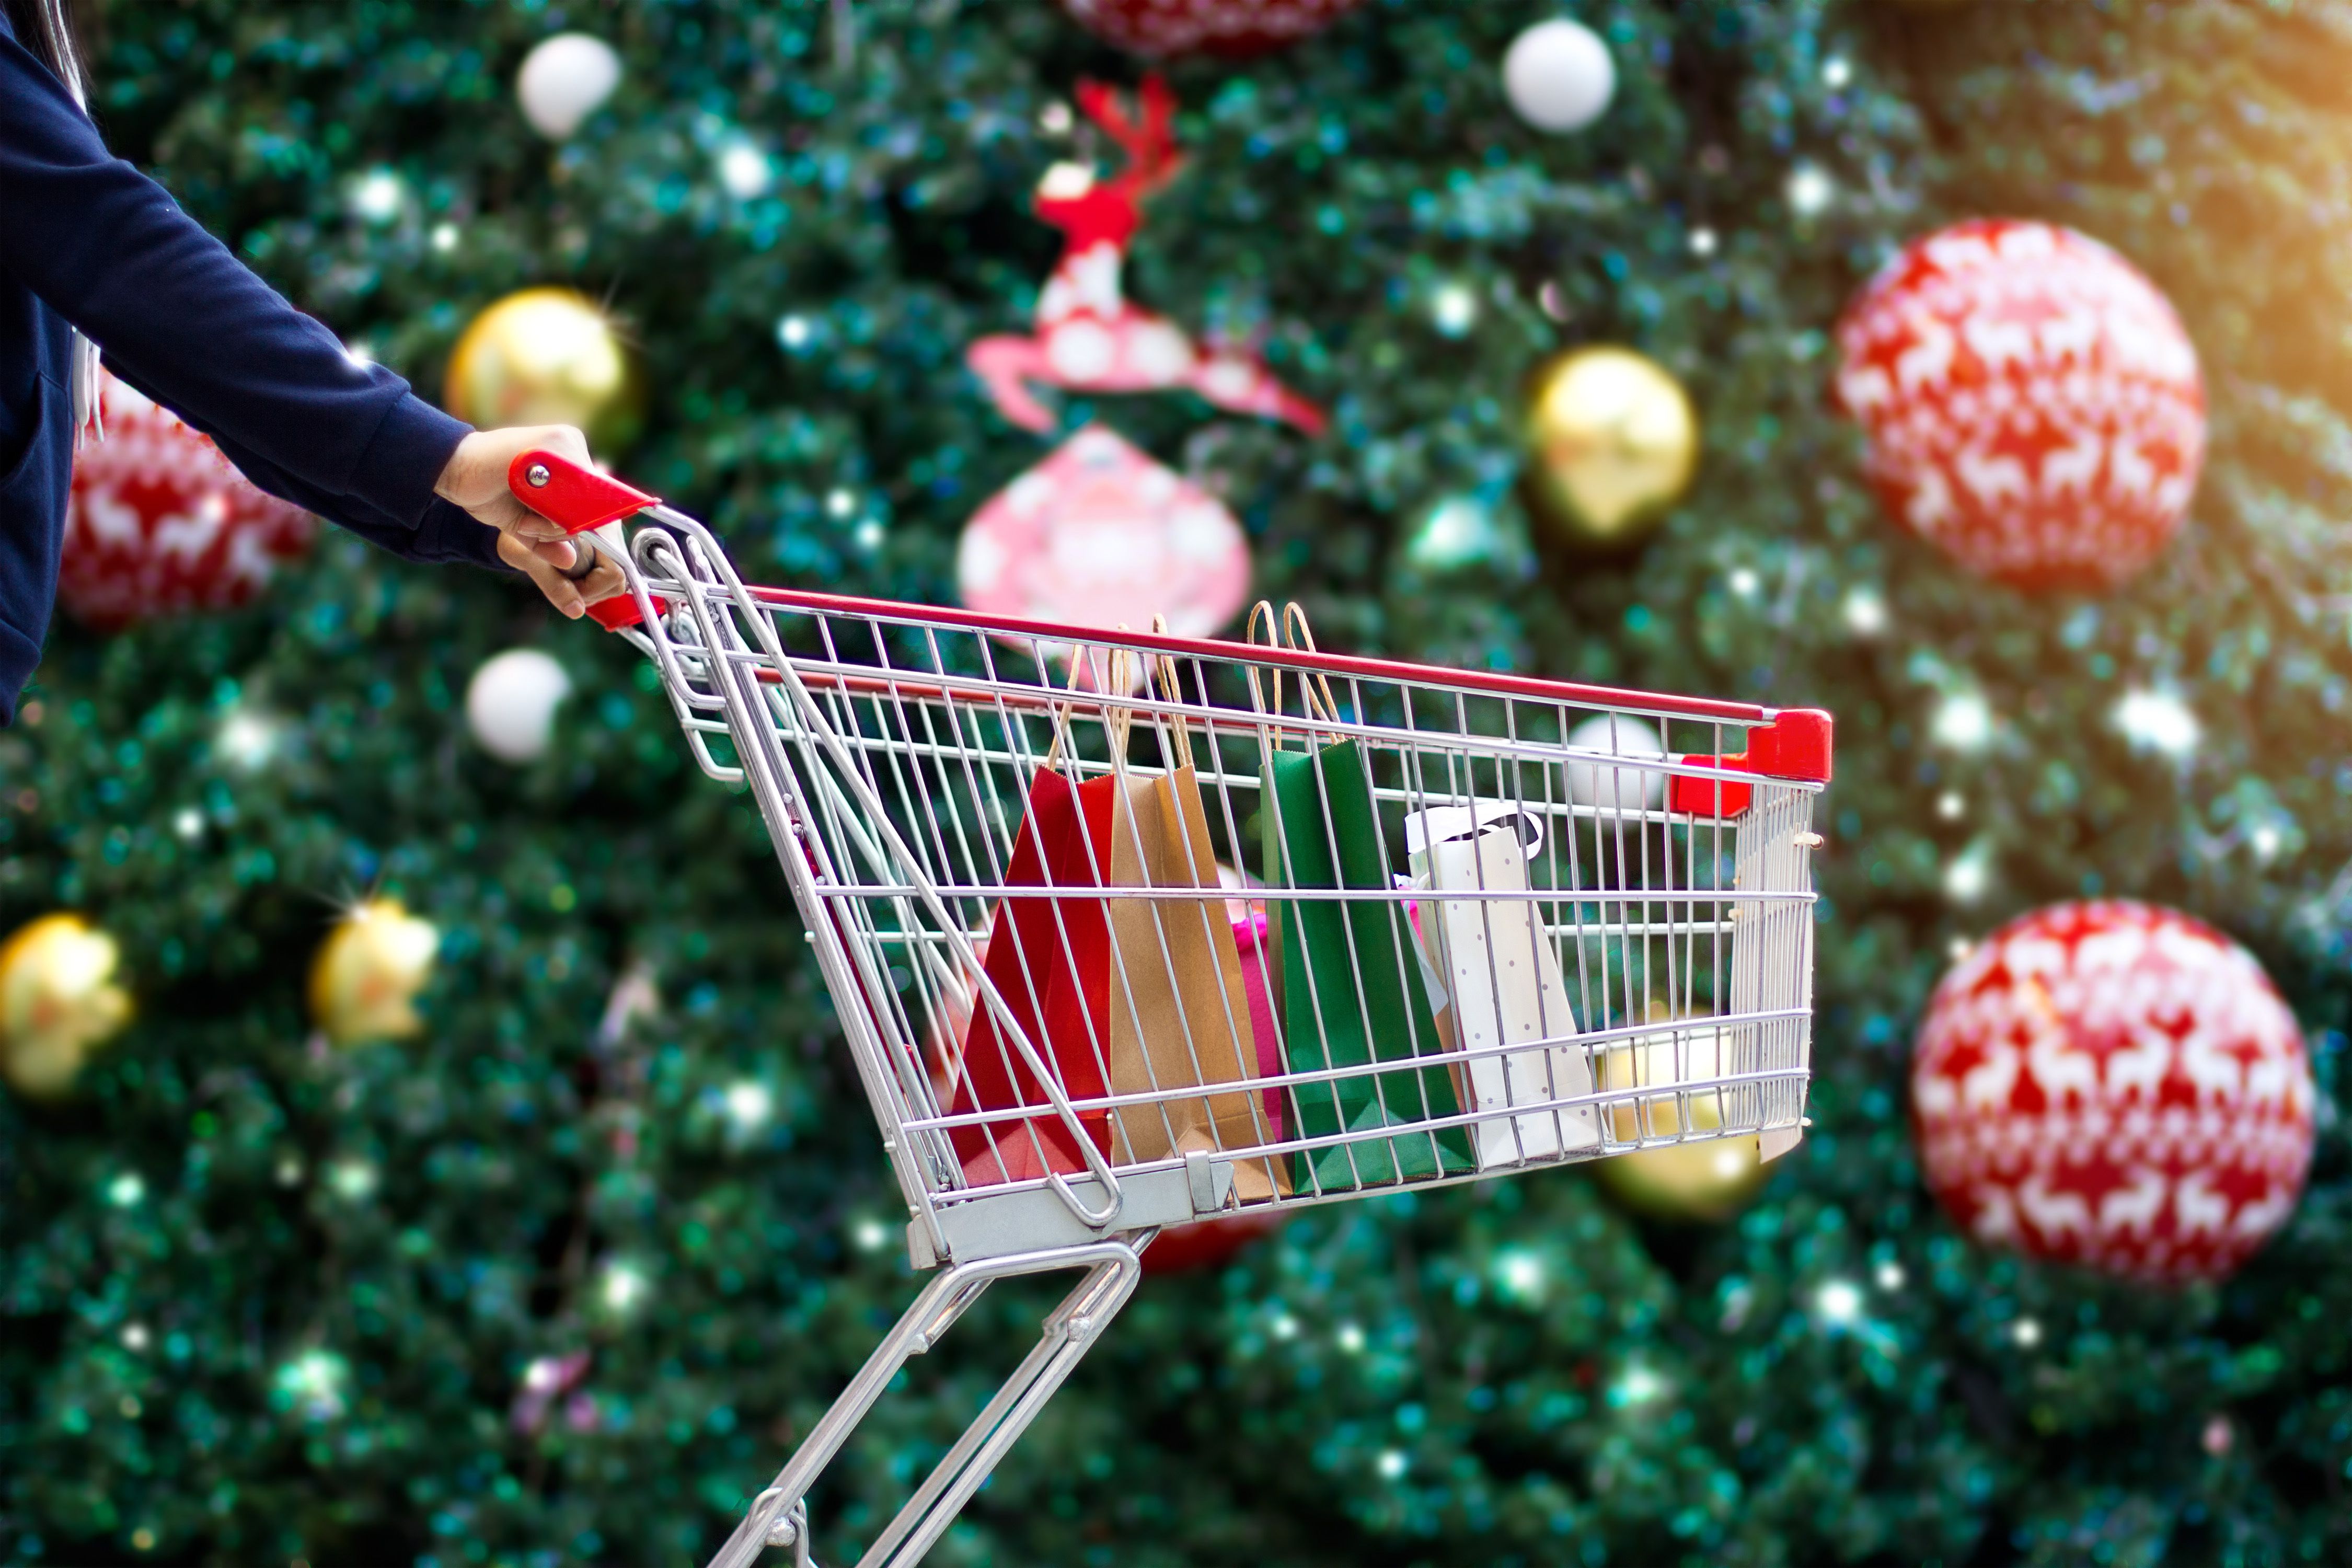 The best places to buy Christmas gifts